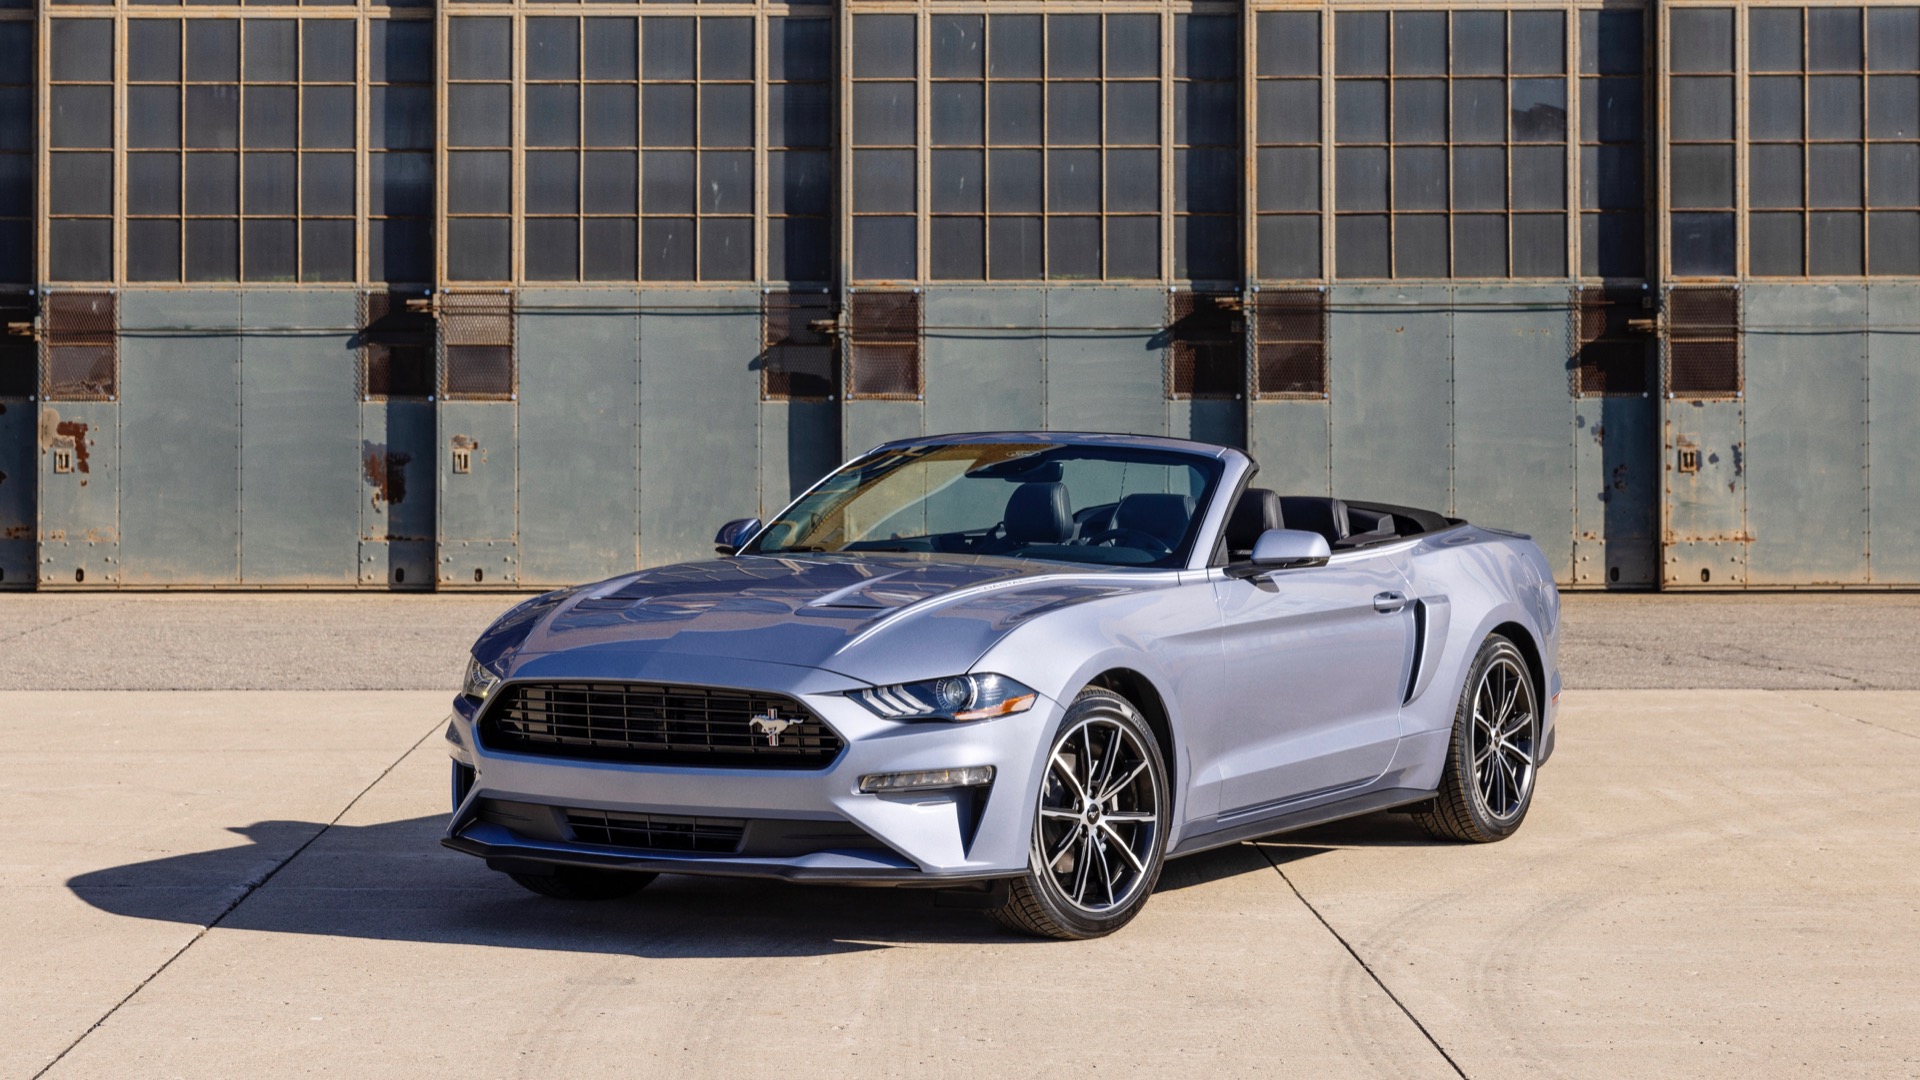 2022 Ford Mustang Pricing & Options